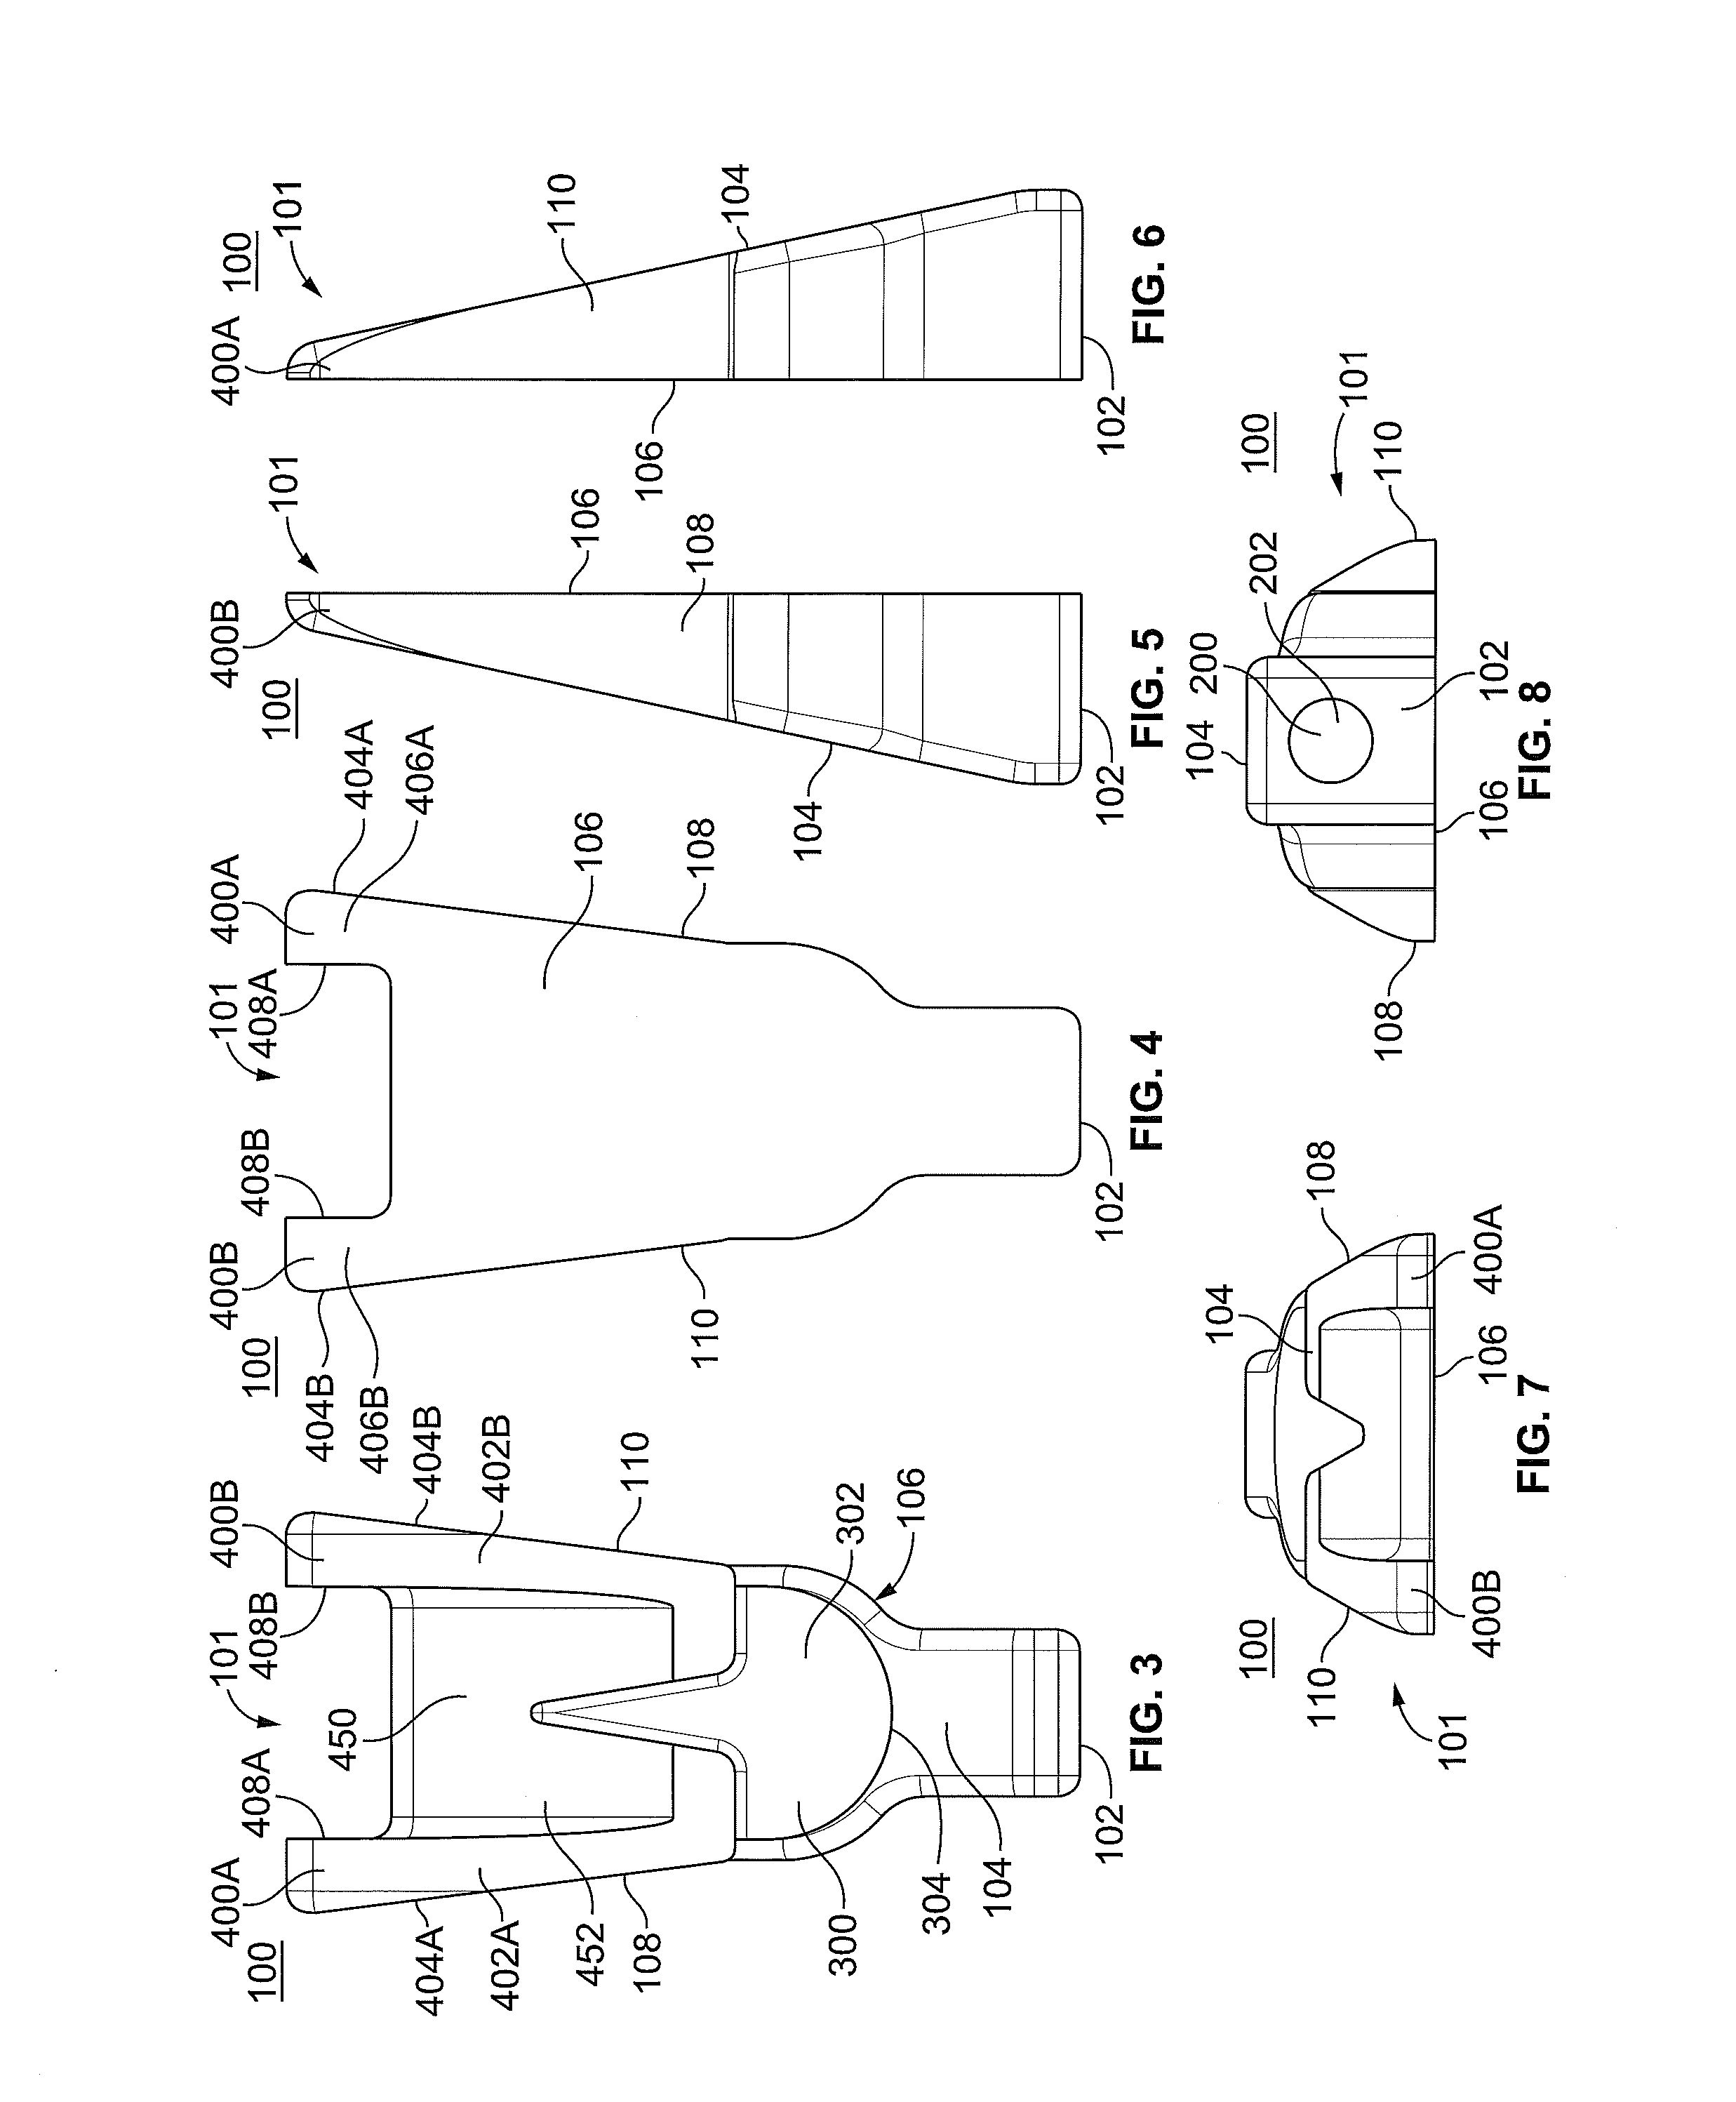 Adapter apparatus for portable handheld device